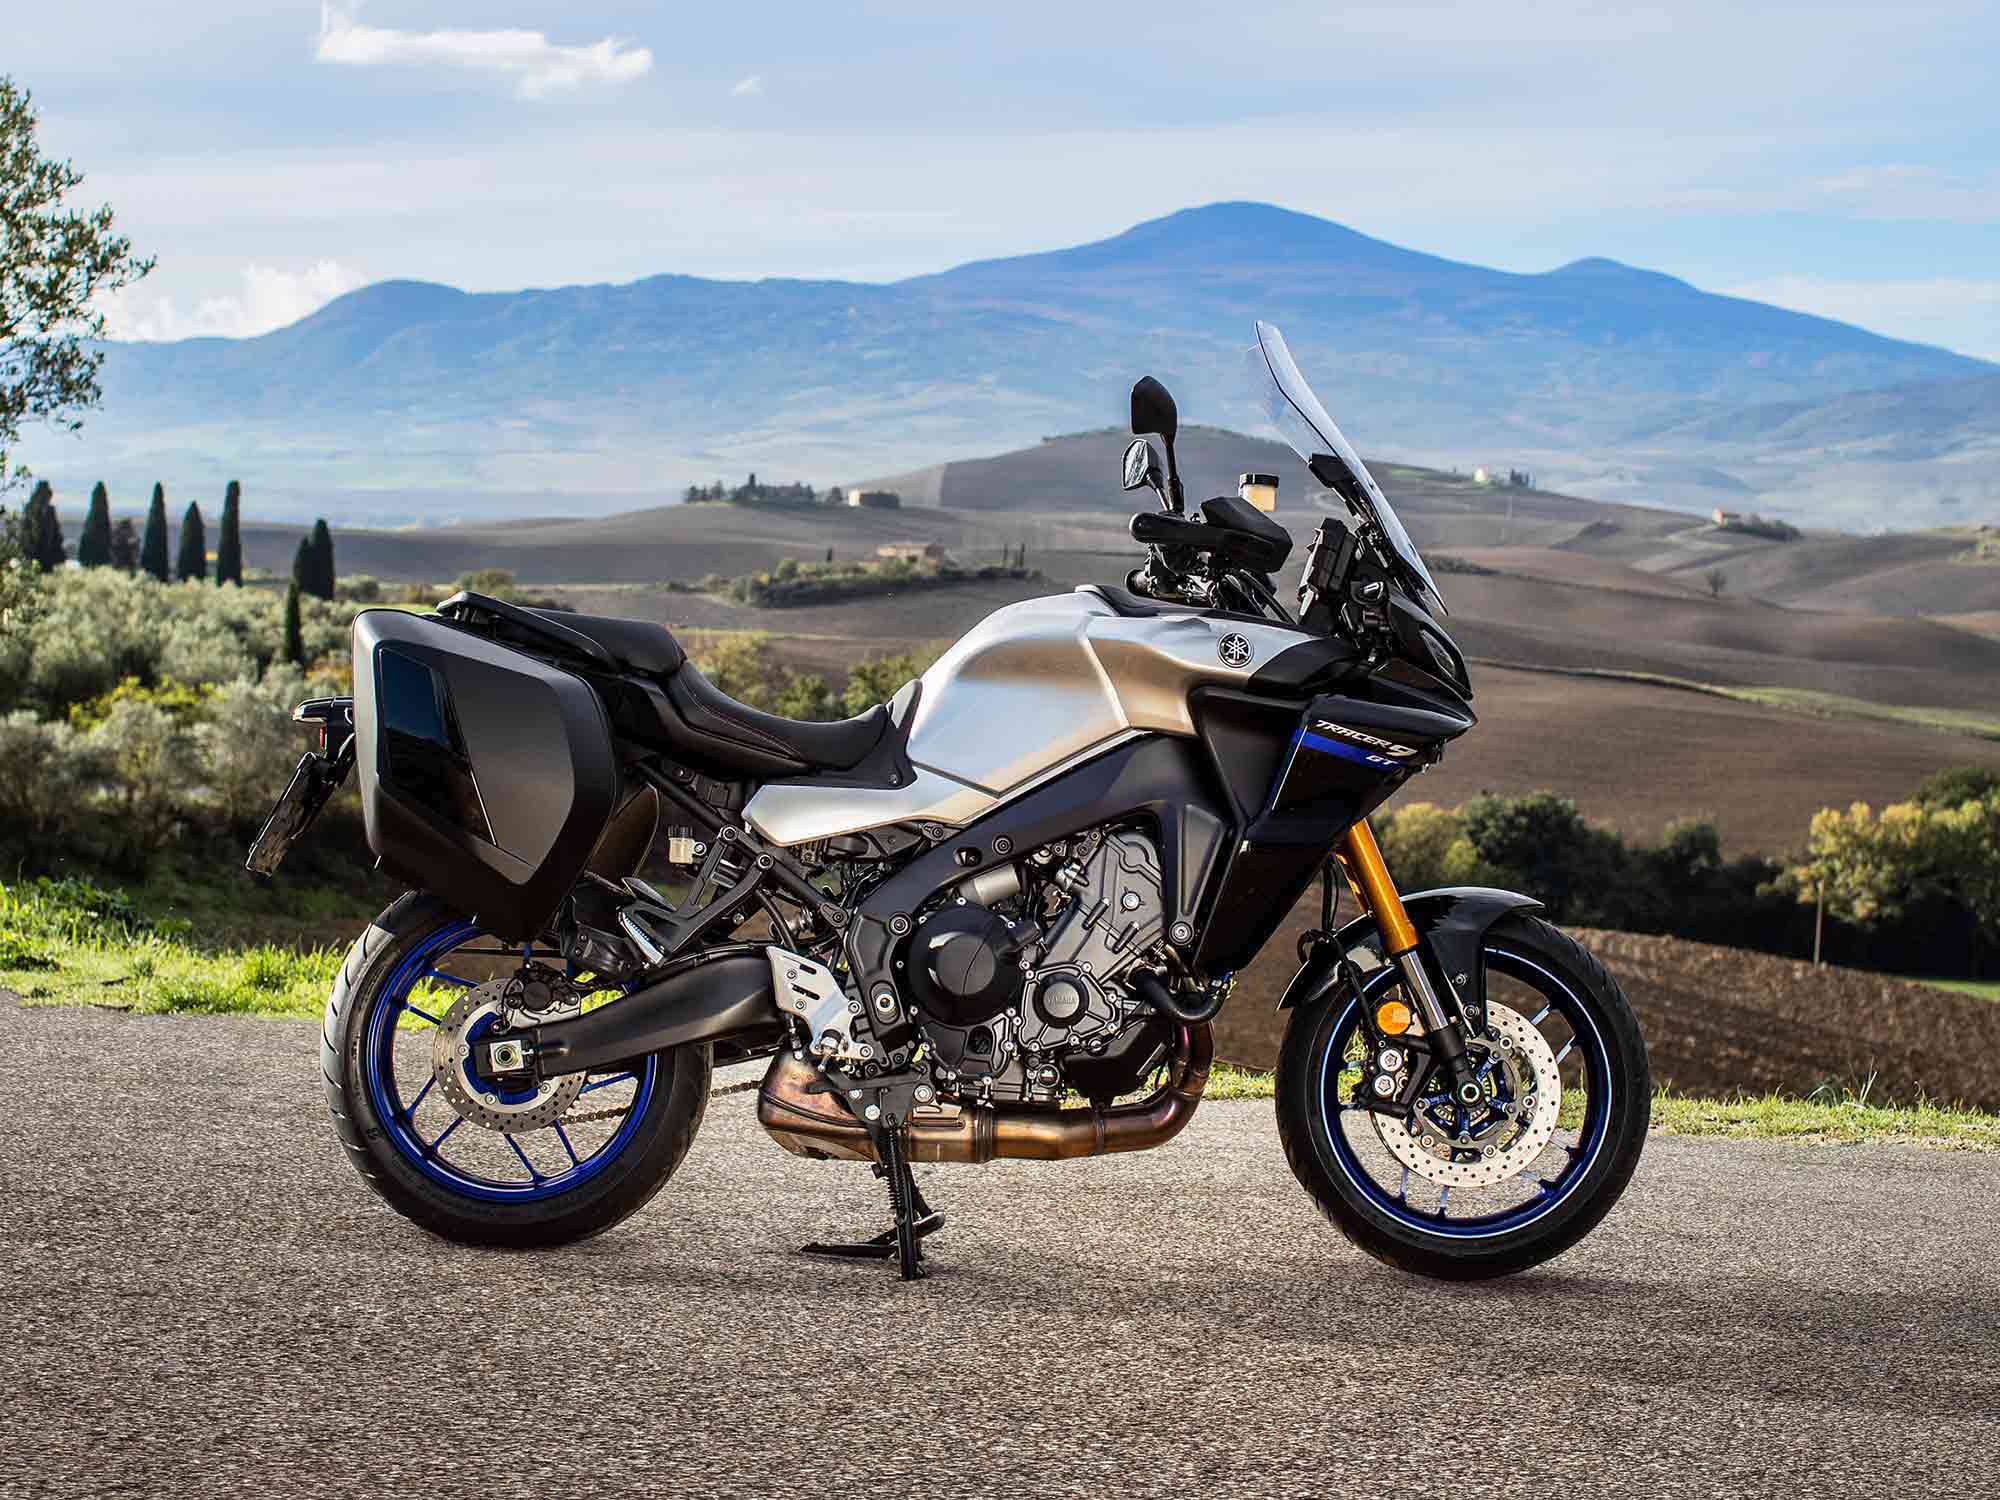 Yamaha's Tracer 9 GT. Media sourced from Cycle World.